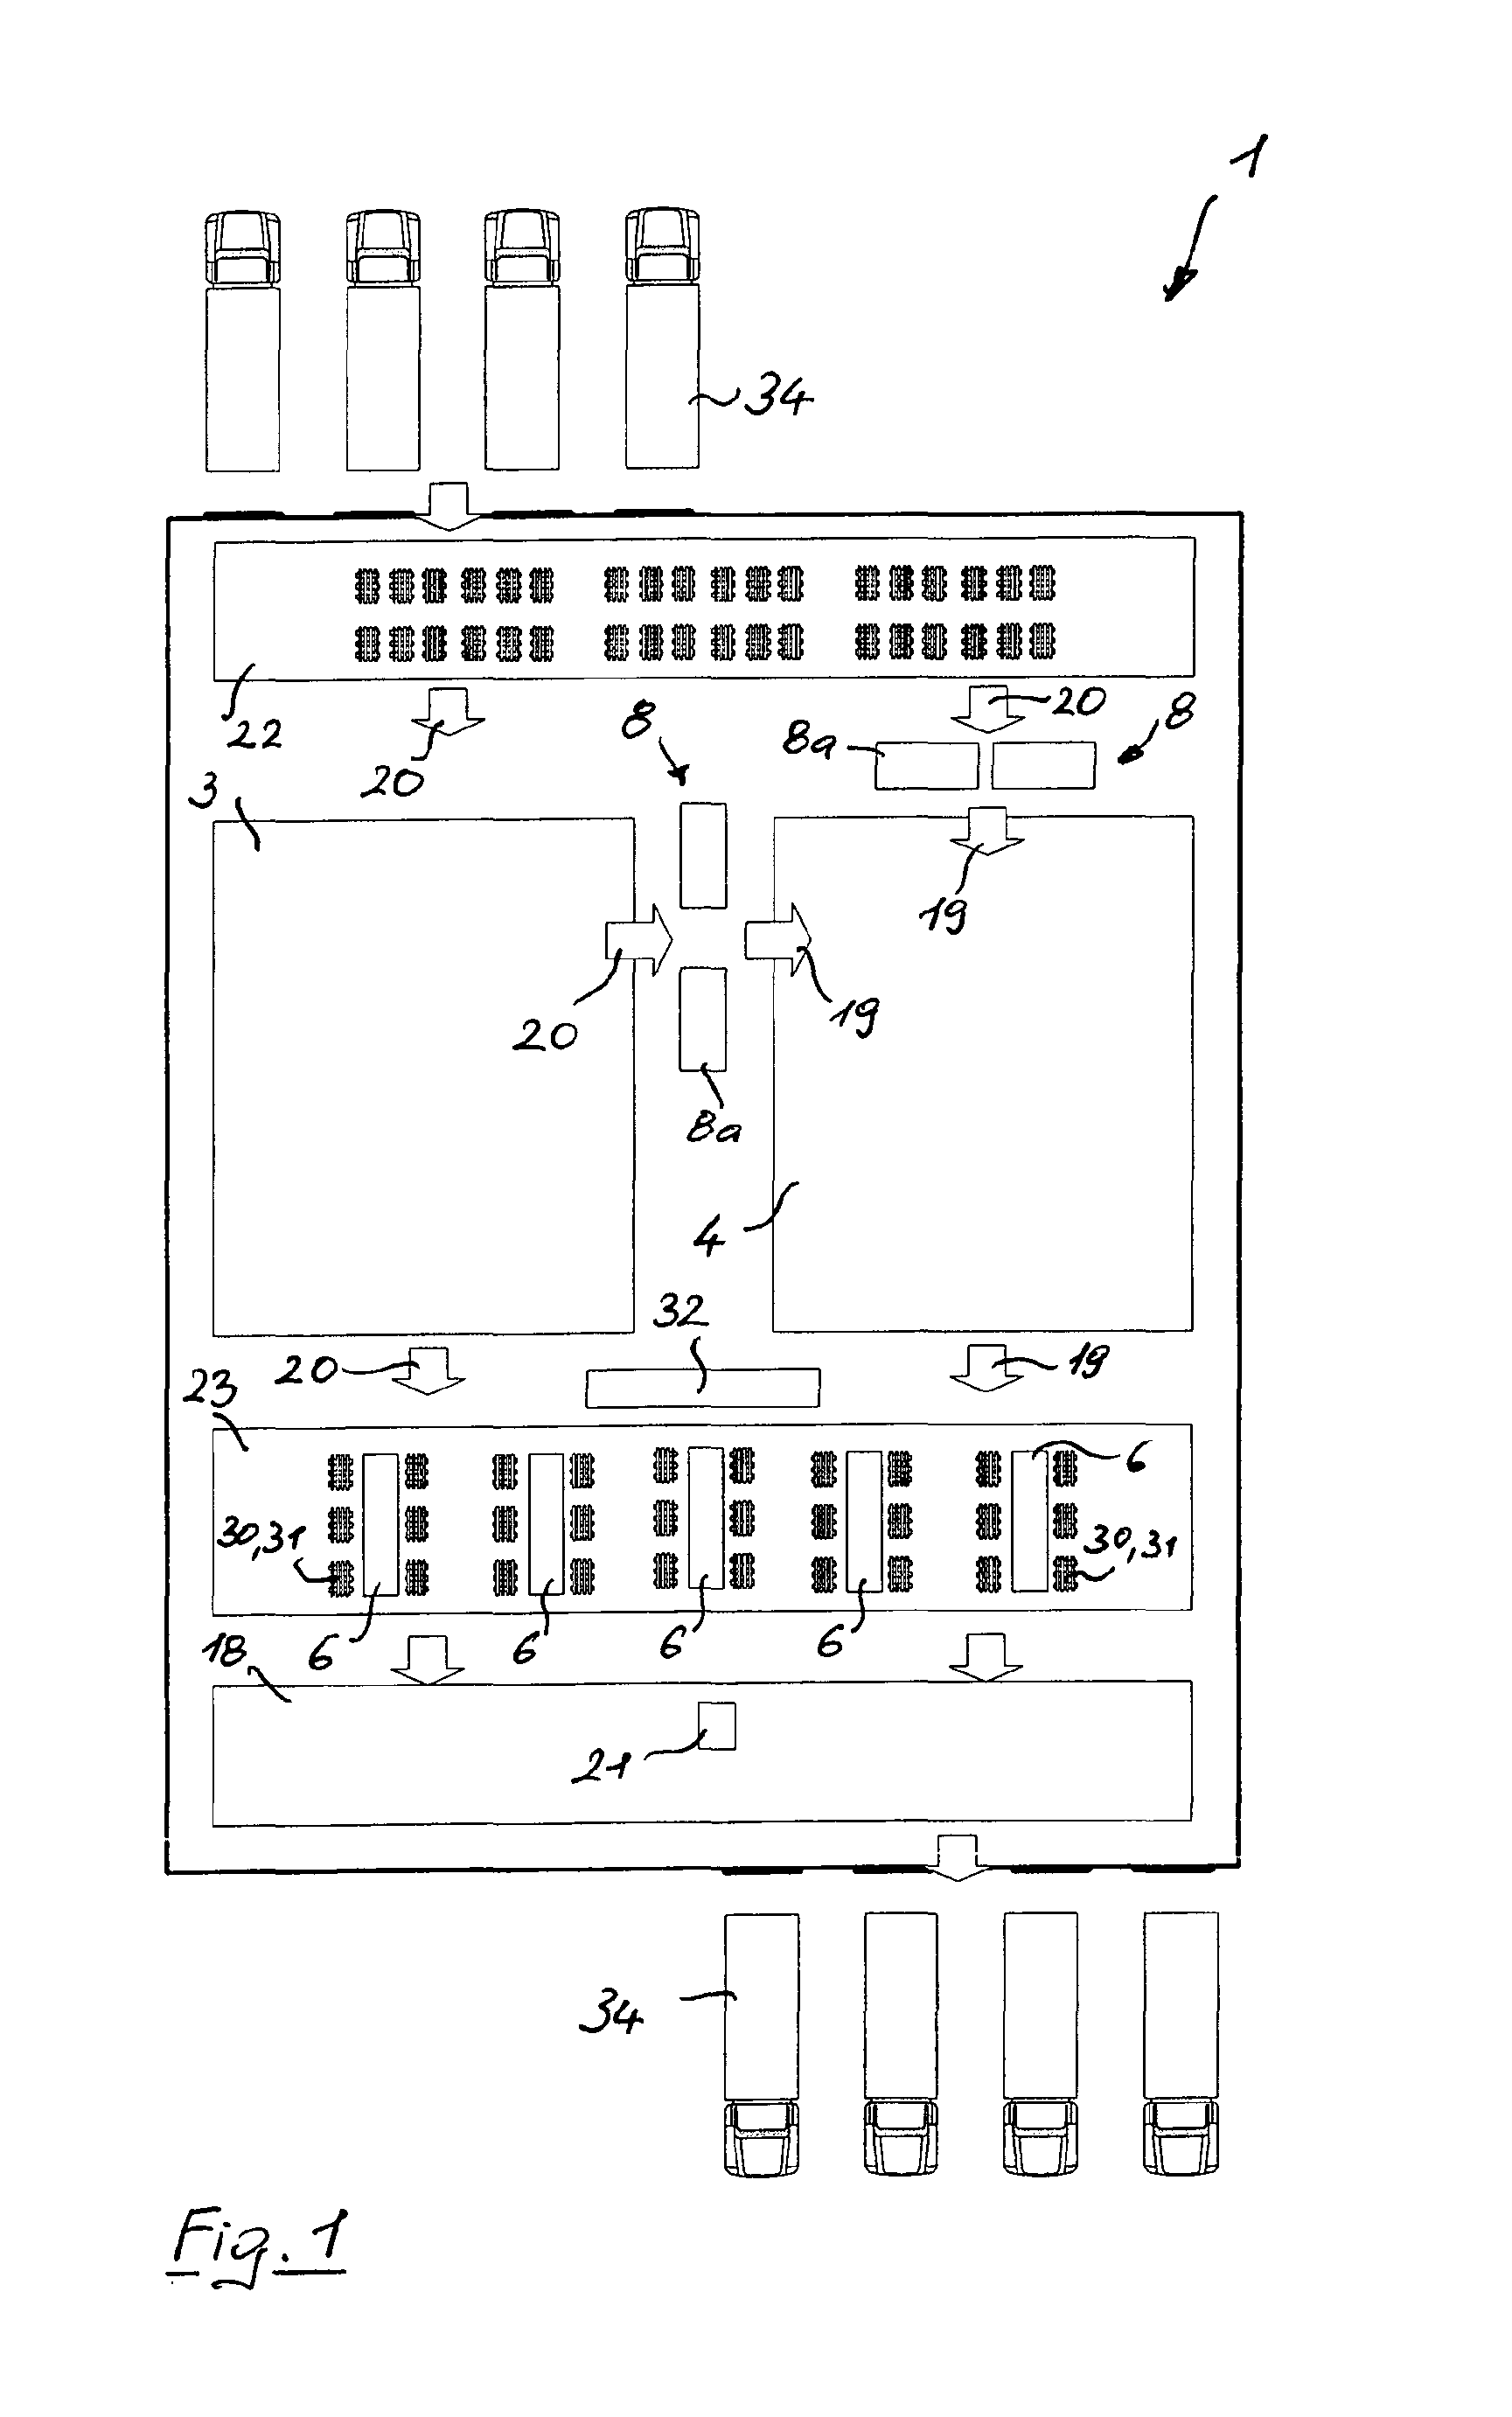 Method and storage system for storing and order-picking articles